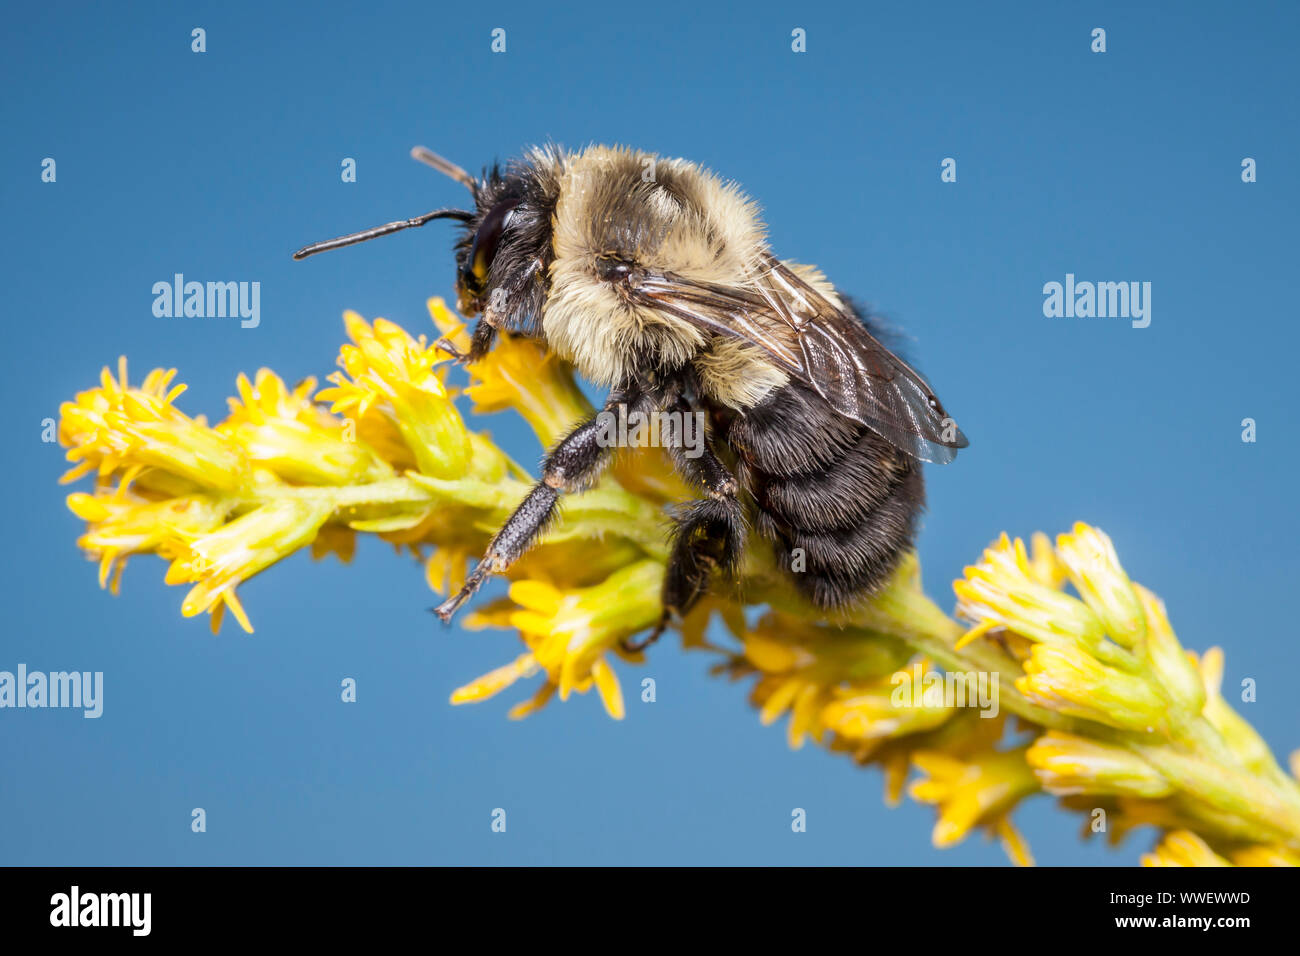 A Common Eastern Bumble Bee (Bombus impatiens) perches on a Goldenrod flower. Stock Photo